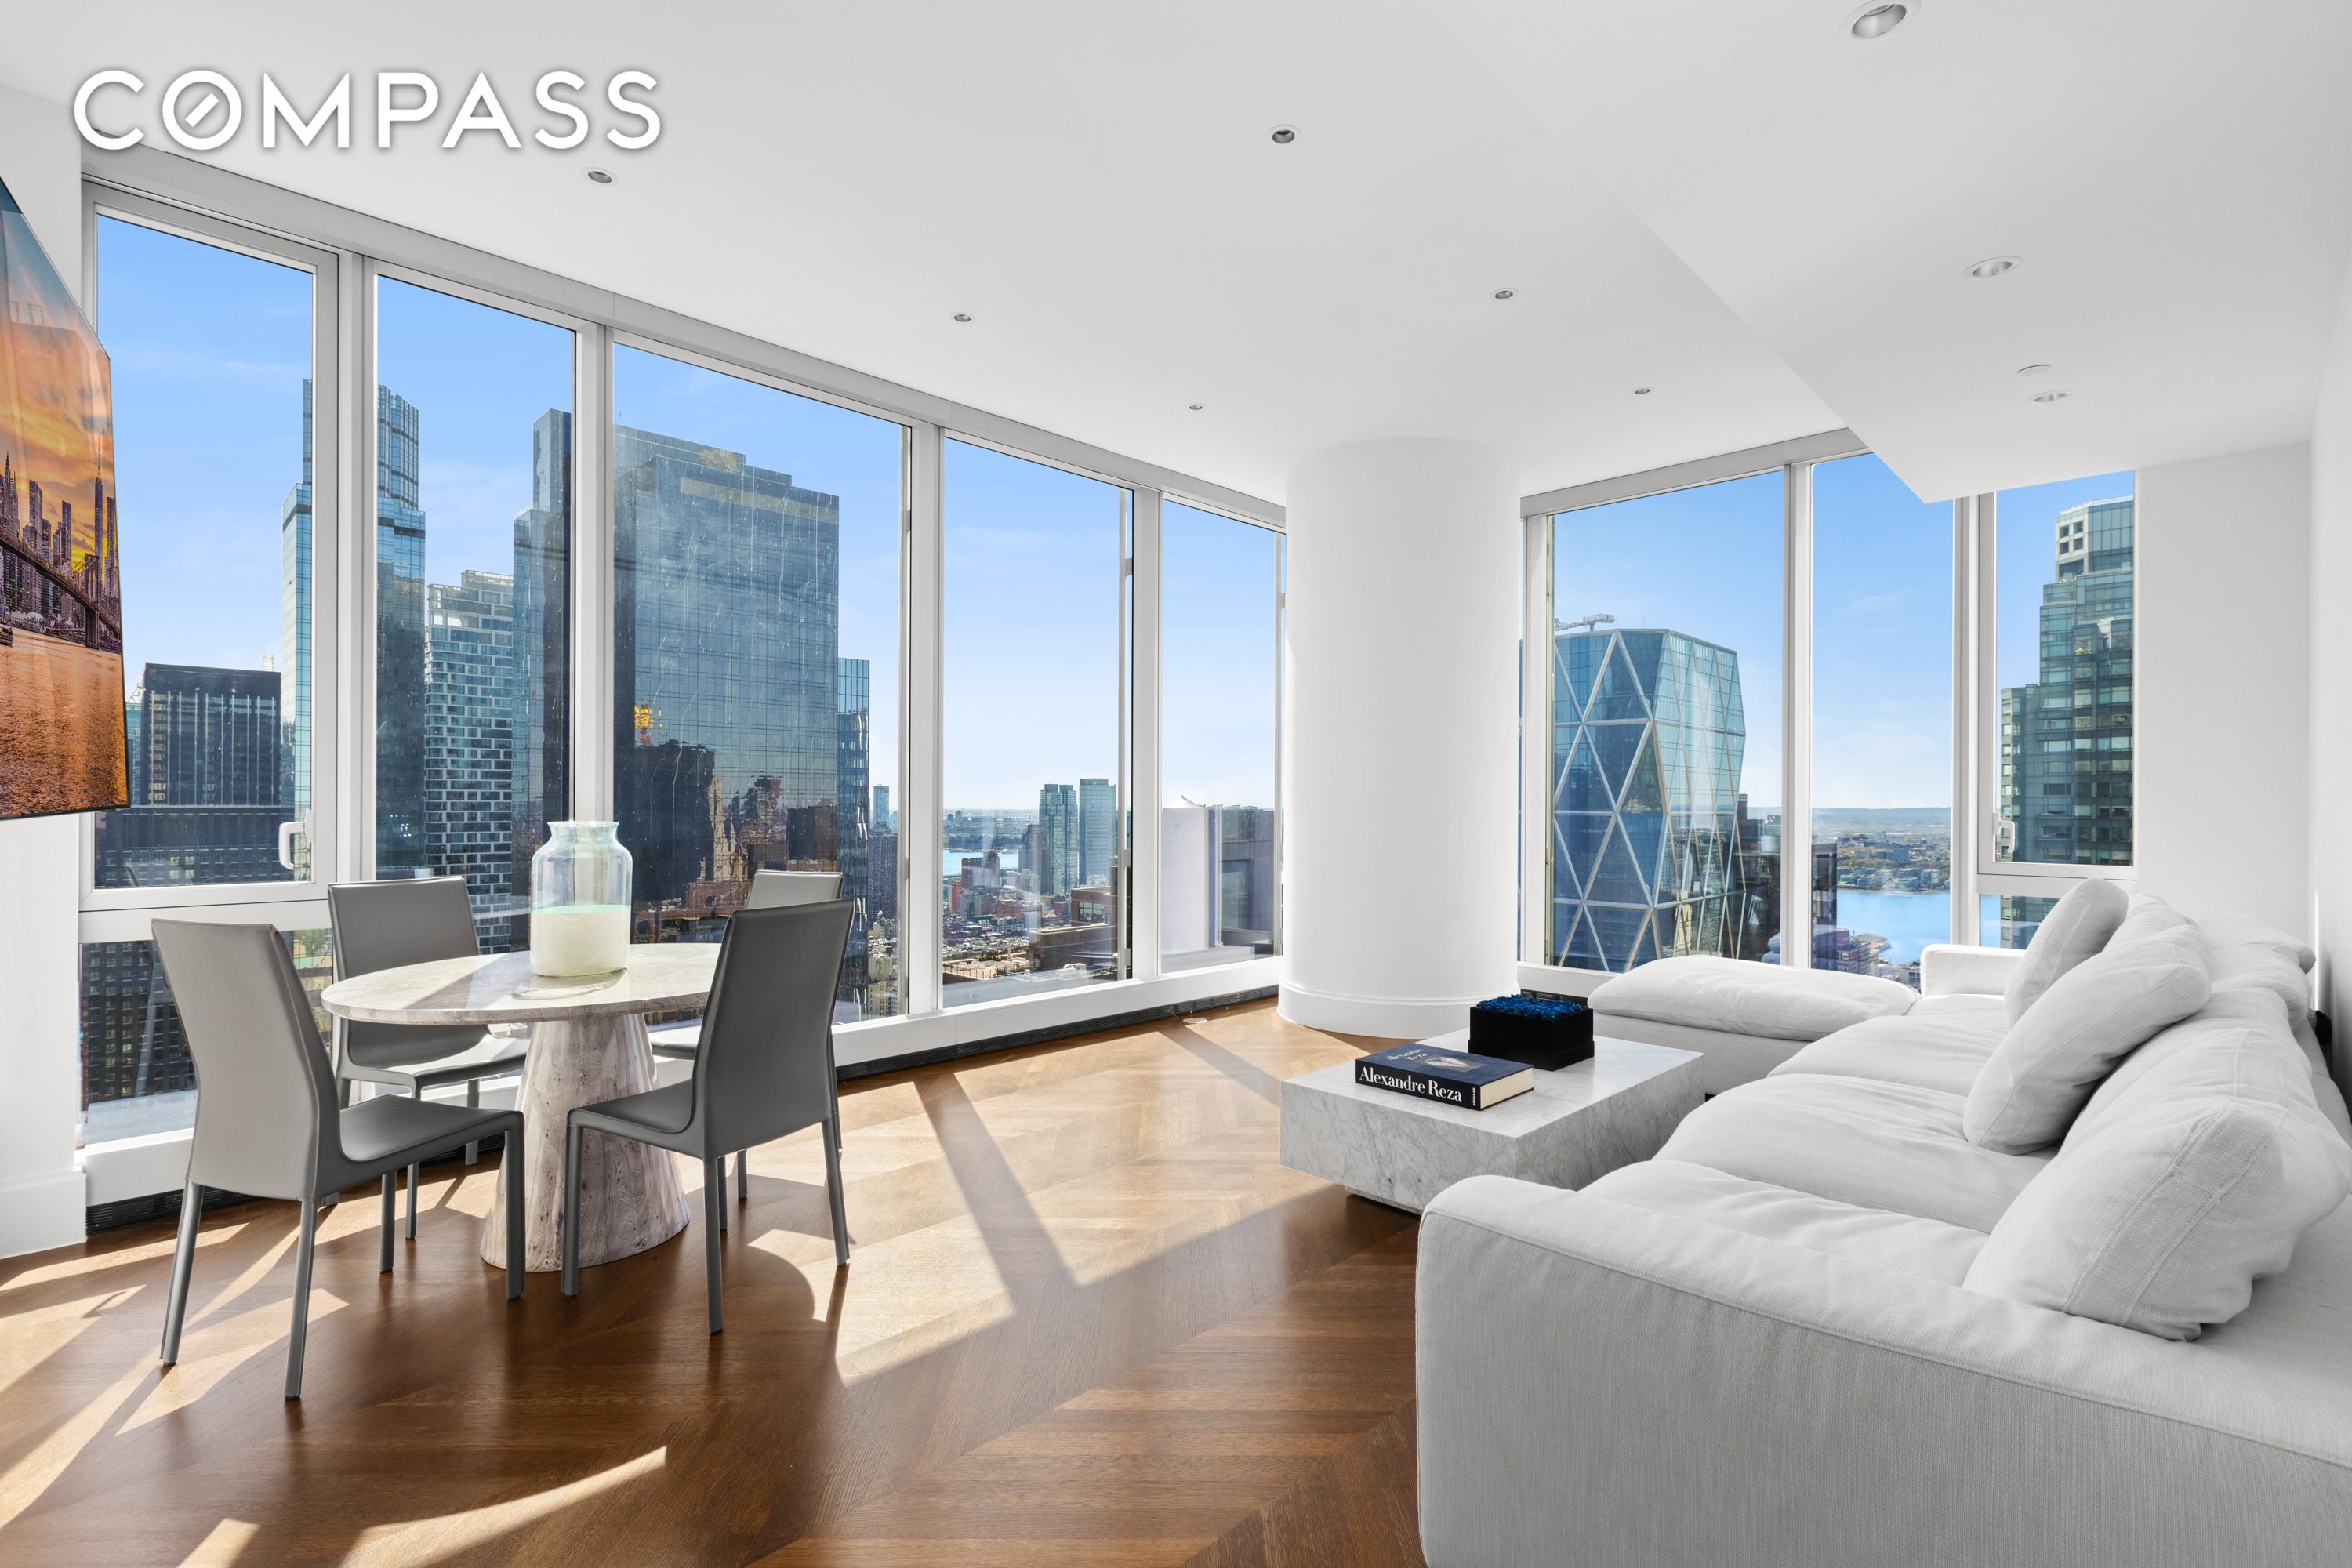 217 West 57th Street 48D, Midtown Central, Midtown East, NYC - 1 Bedrooms  
1.5 Bathrooms  
3 Rooms - 